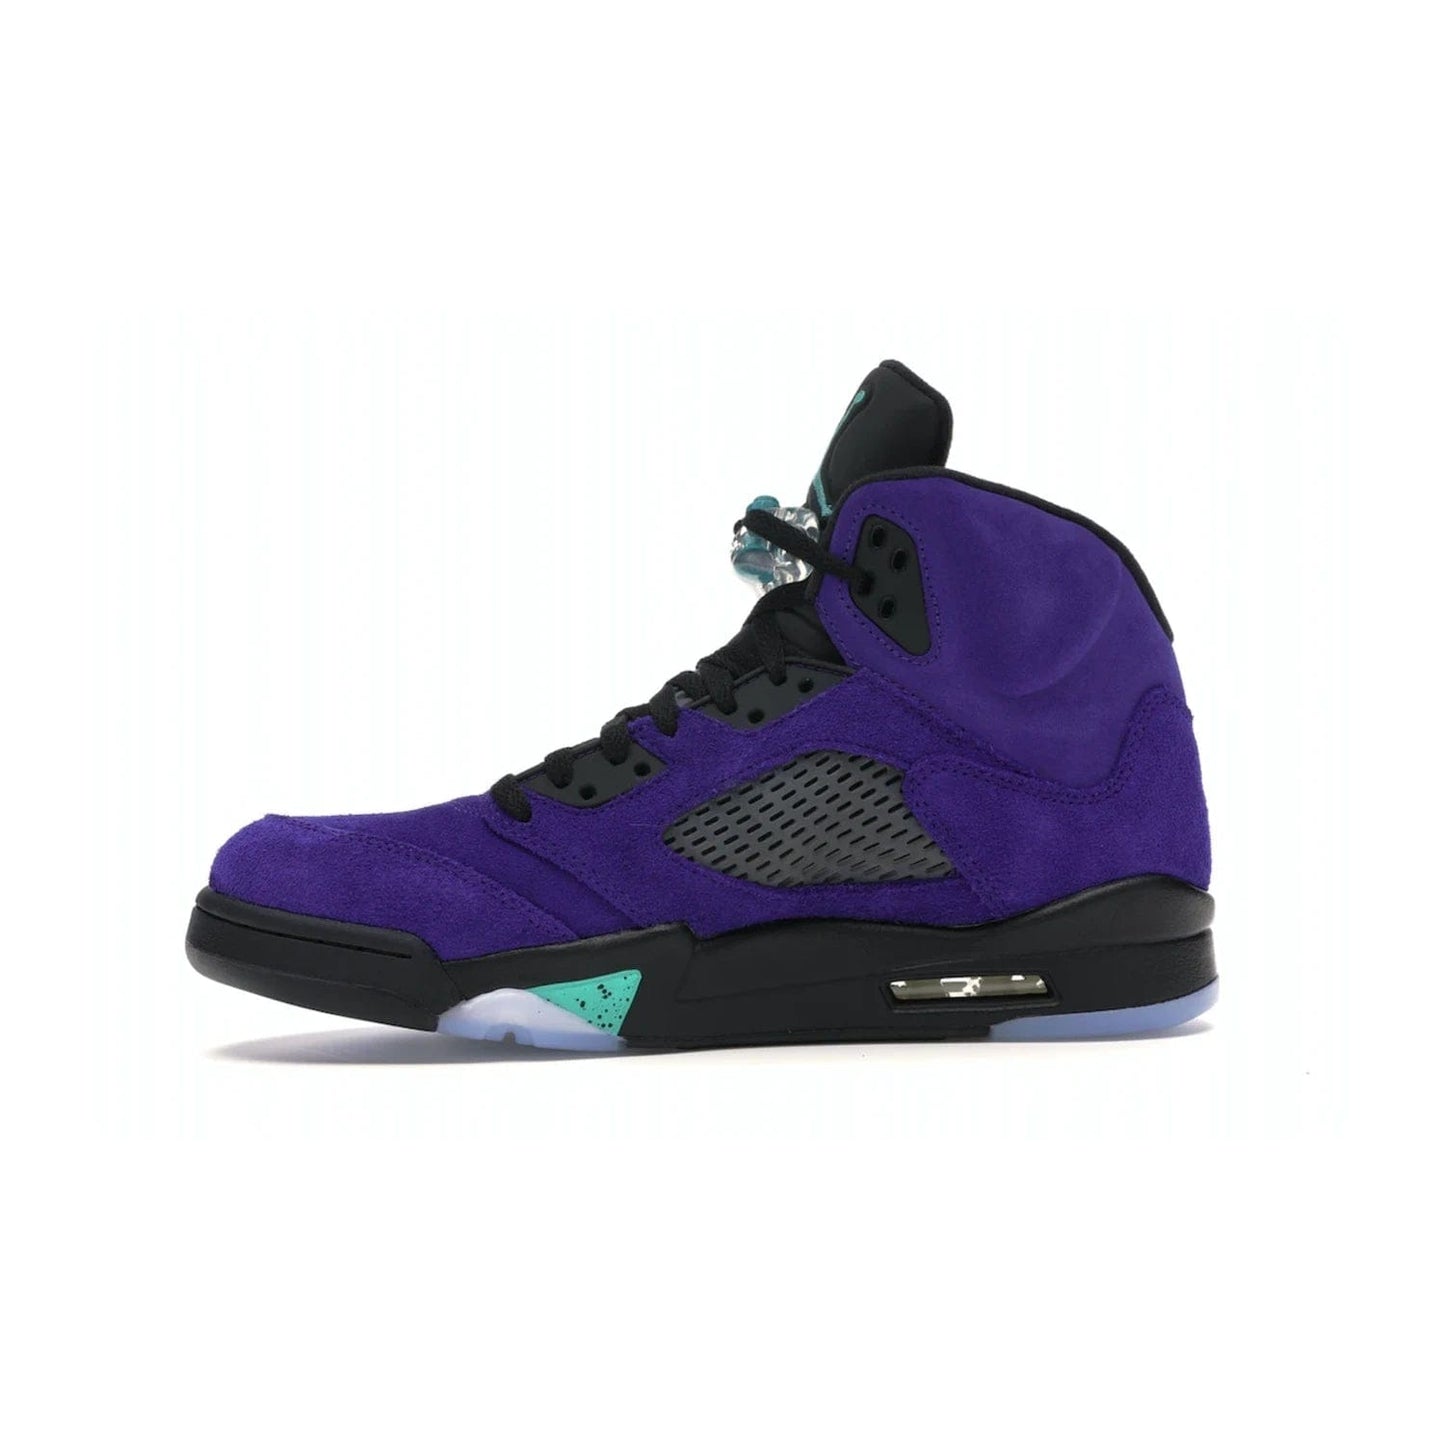 Jordan 5 Retro Alternate Grape - Image 18 - Only at www.BallersClubKickz.com - Bring the classic Jordan 5 Retro Alternate Grape to your sneaker collection! Featuring a purple suede upper, charcoal underlays, green detailing, and an icy and green outsole. Releasing for the first time since 1990, don't miss this chance to add a piece of sneaker history to your collection.